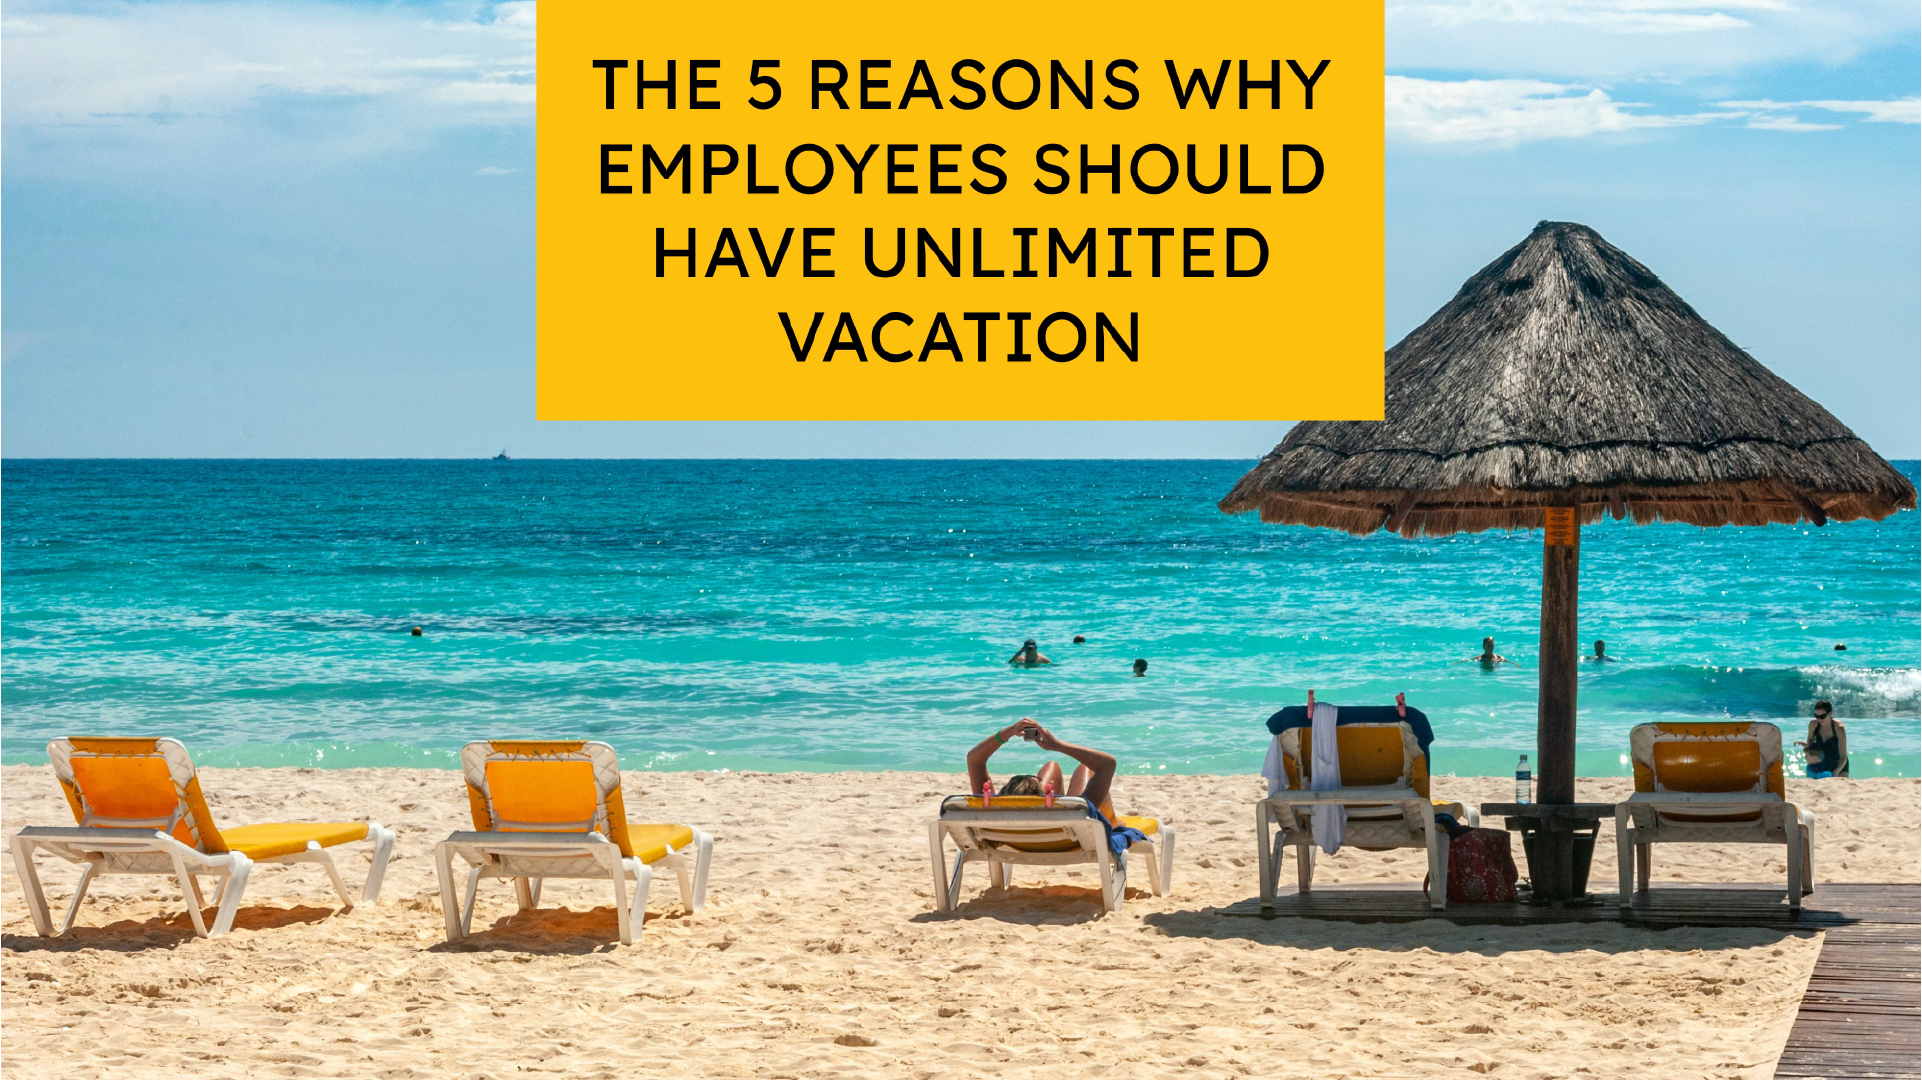 The 5 reasons why employees should have unlimited vacation